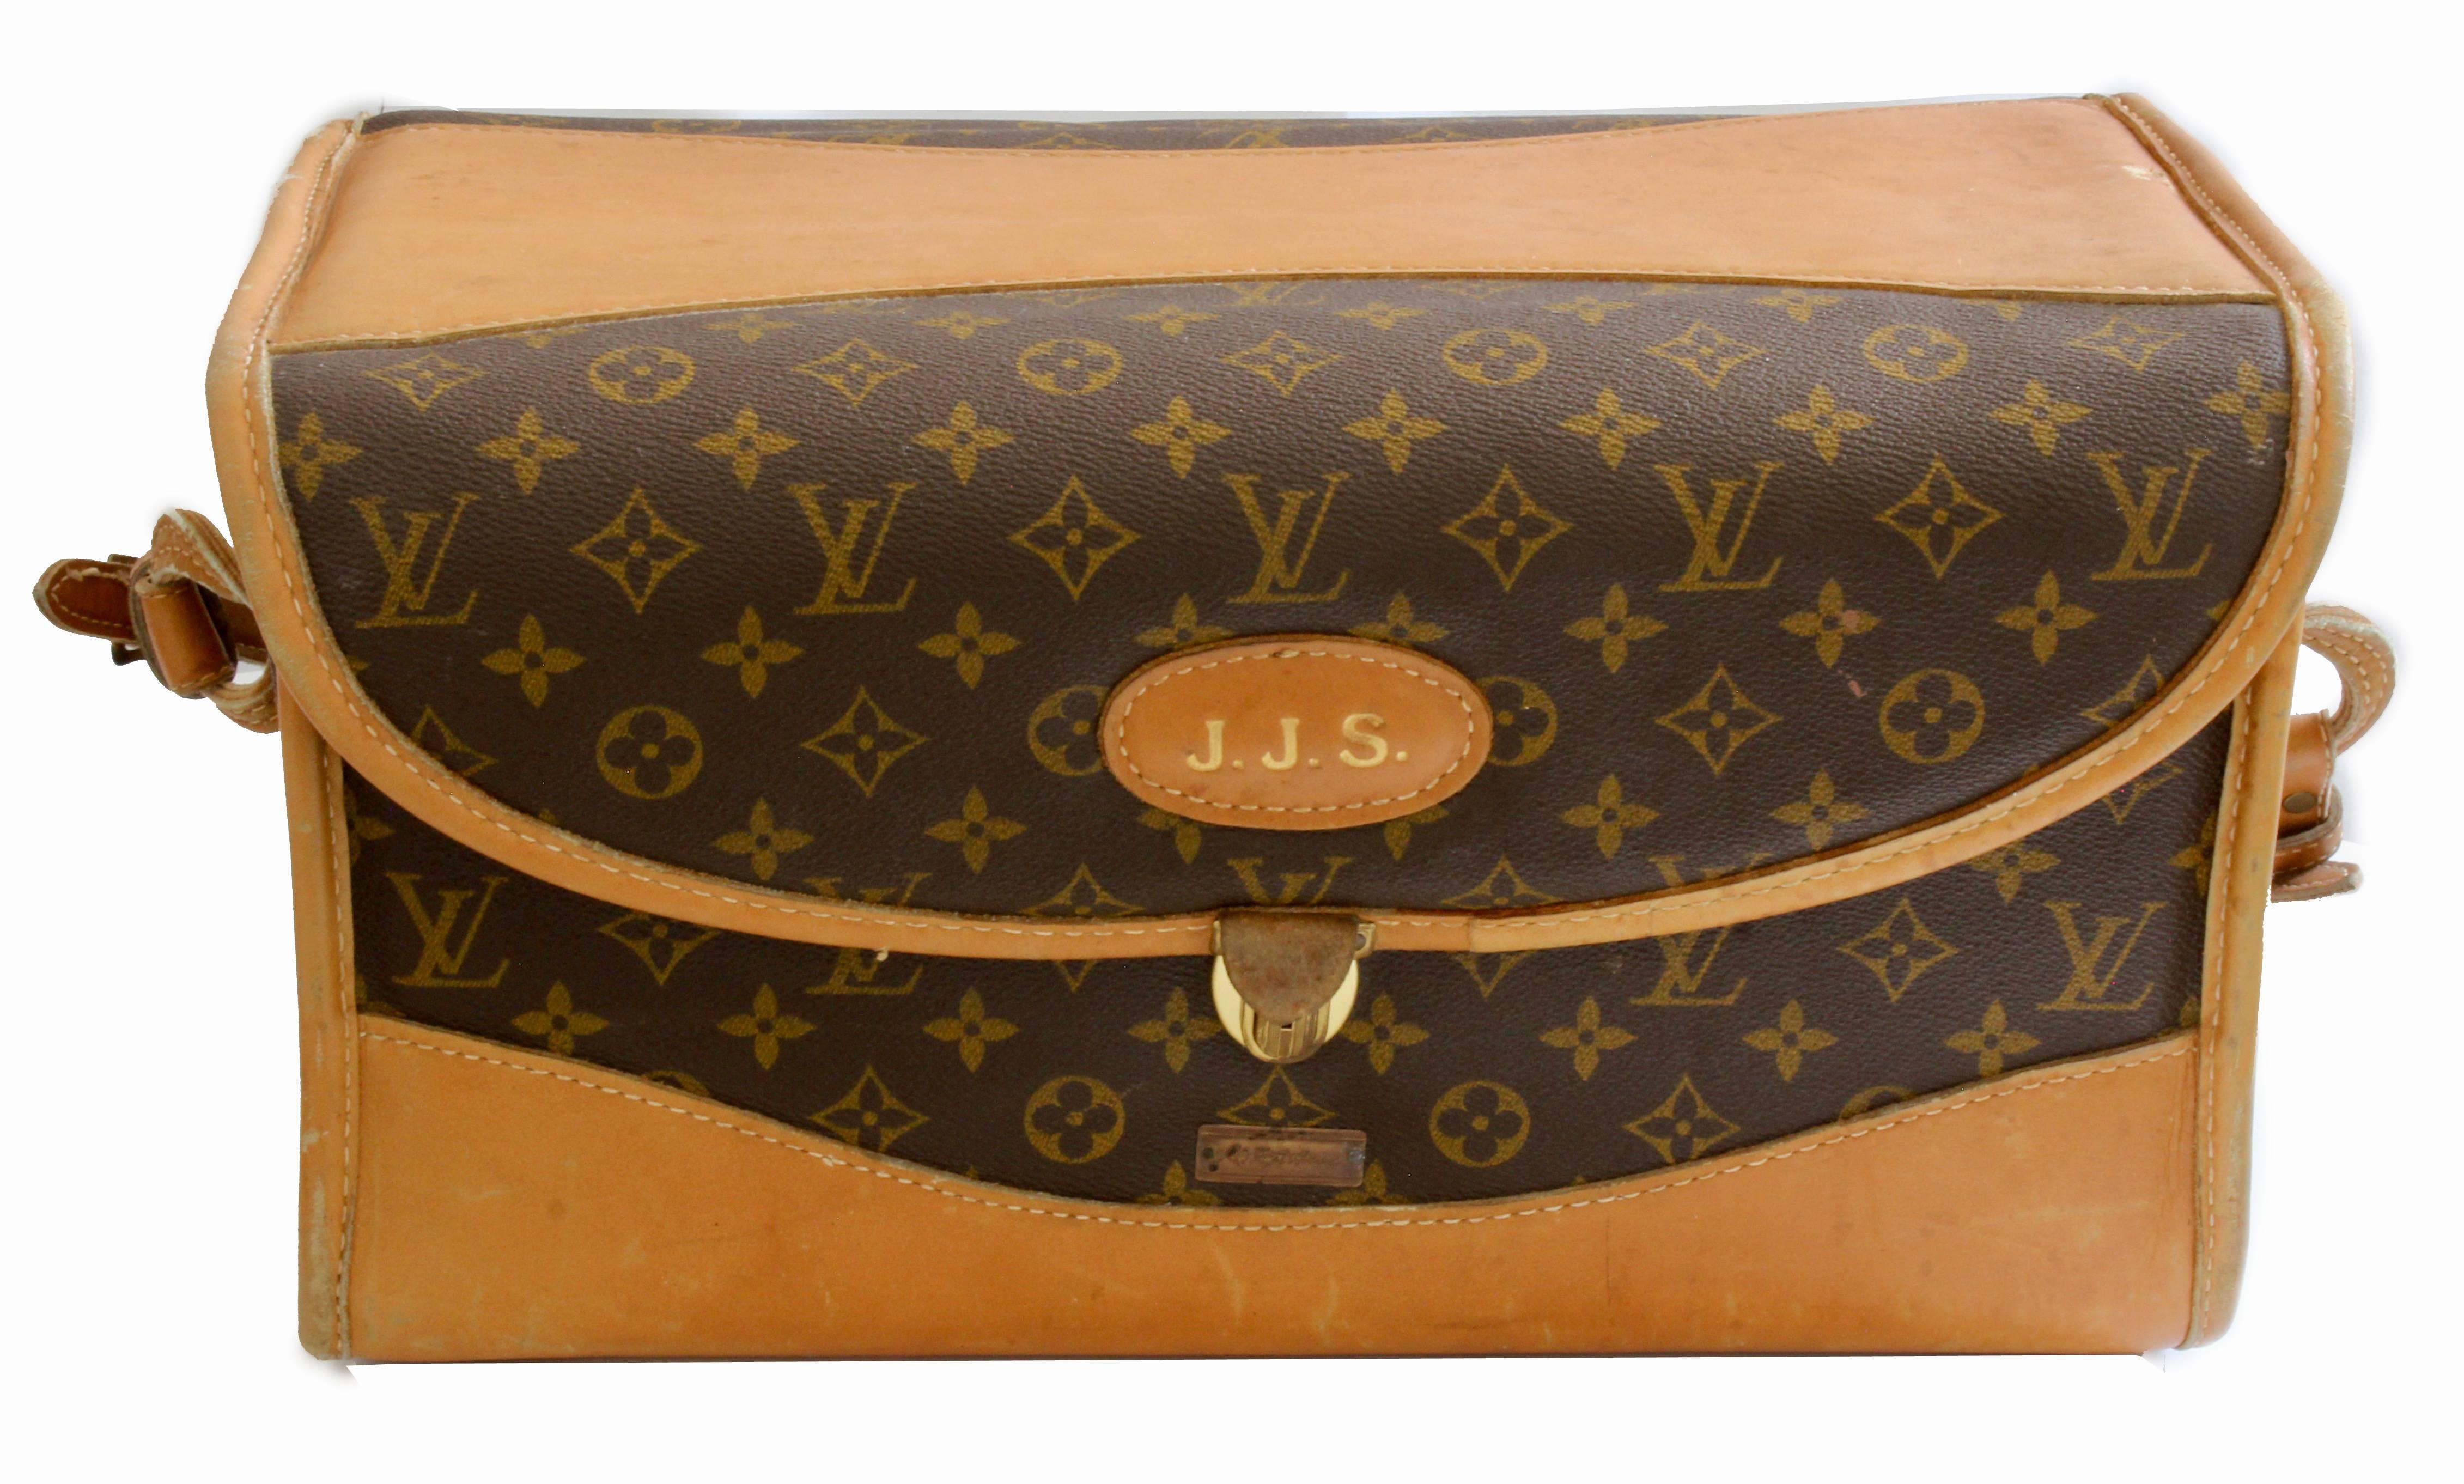 Travel in style with this chic beauty or train case, made in the 70s by The French Company under special license from Louis Vuitton, long before LV had a boutique presence in the USA. These LV x FC bags were only made for a short period, making them